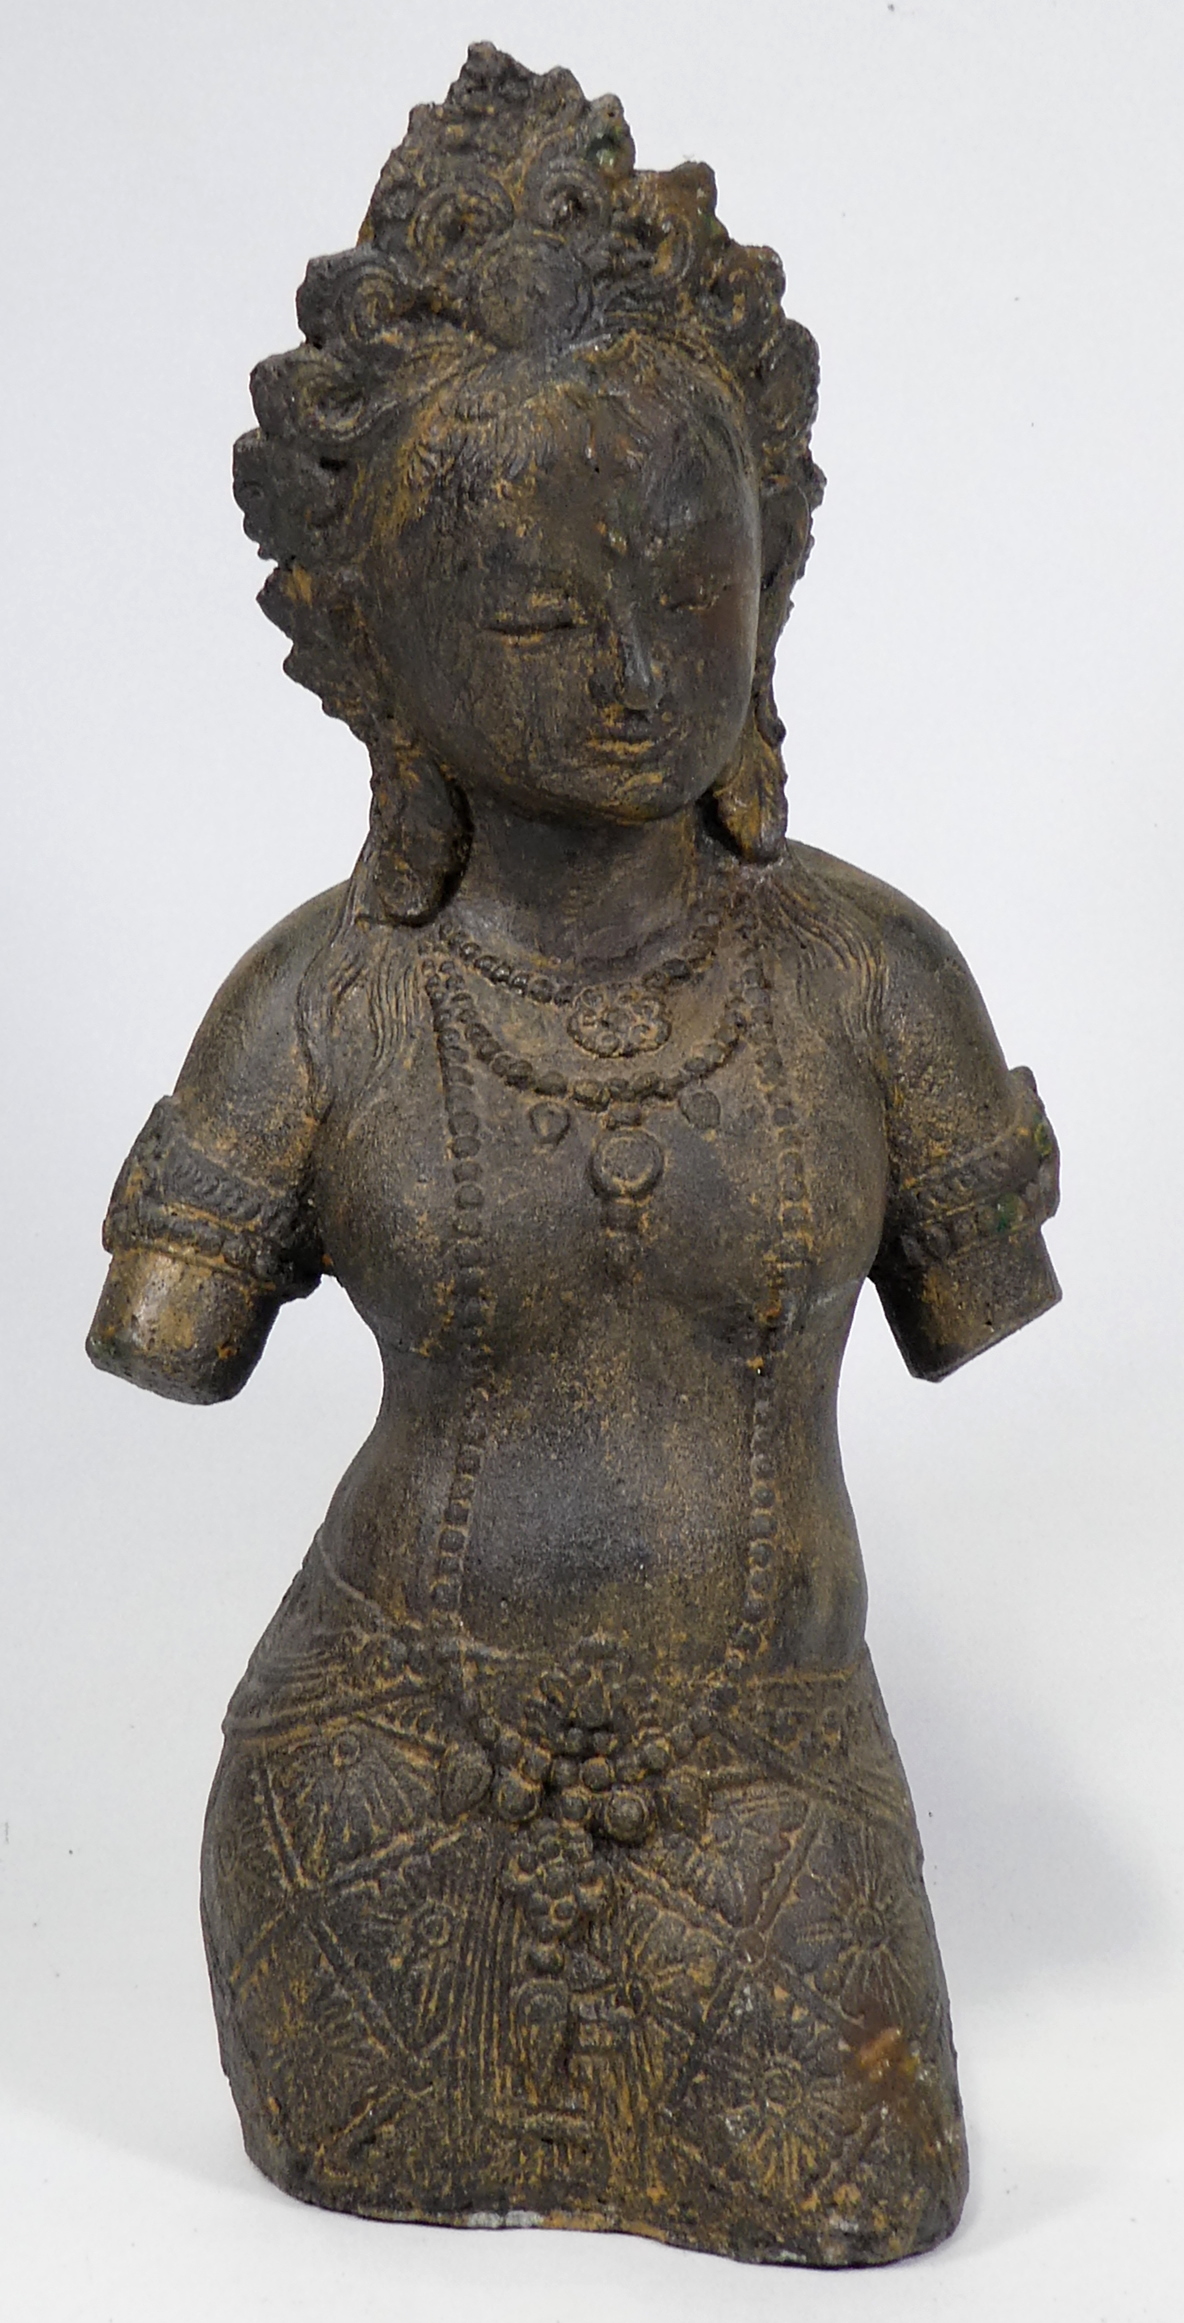 A Balinese deity figure - wearing traditional robes, height 41cm.